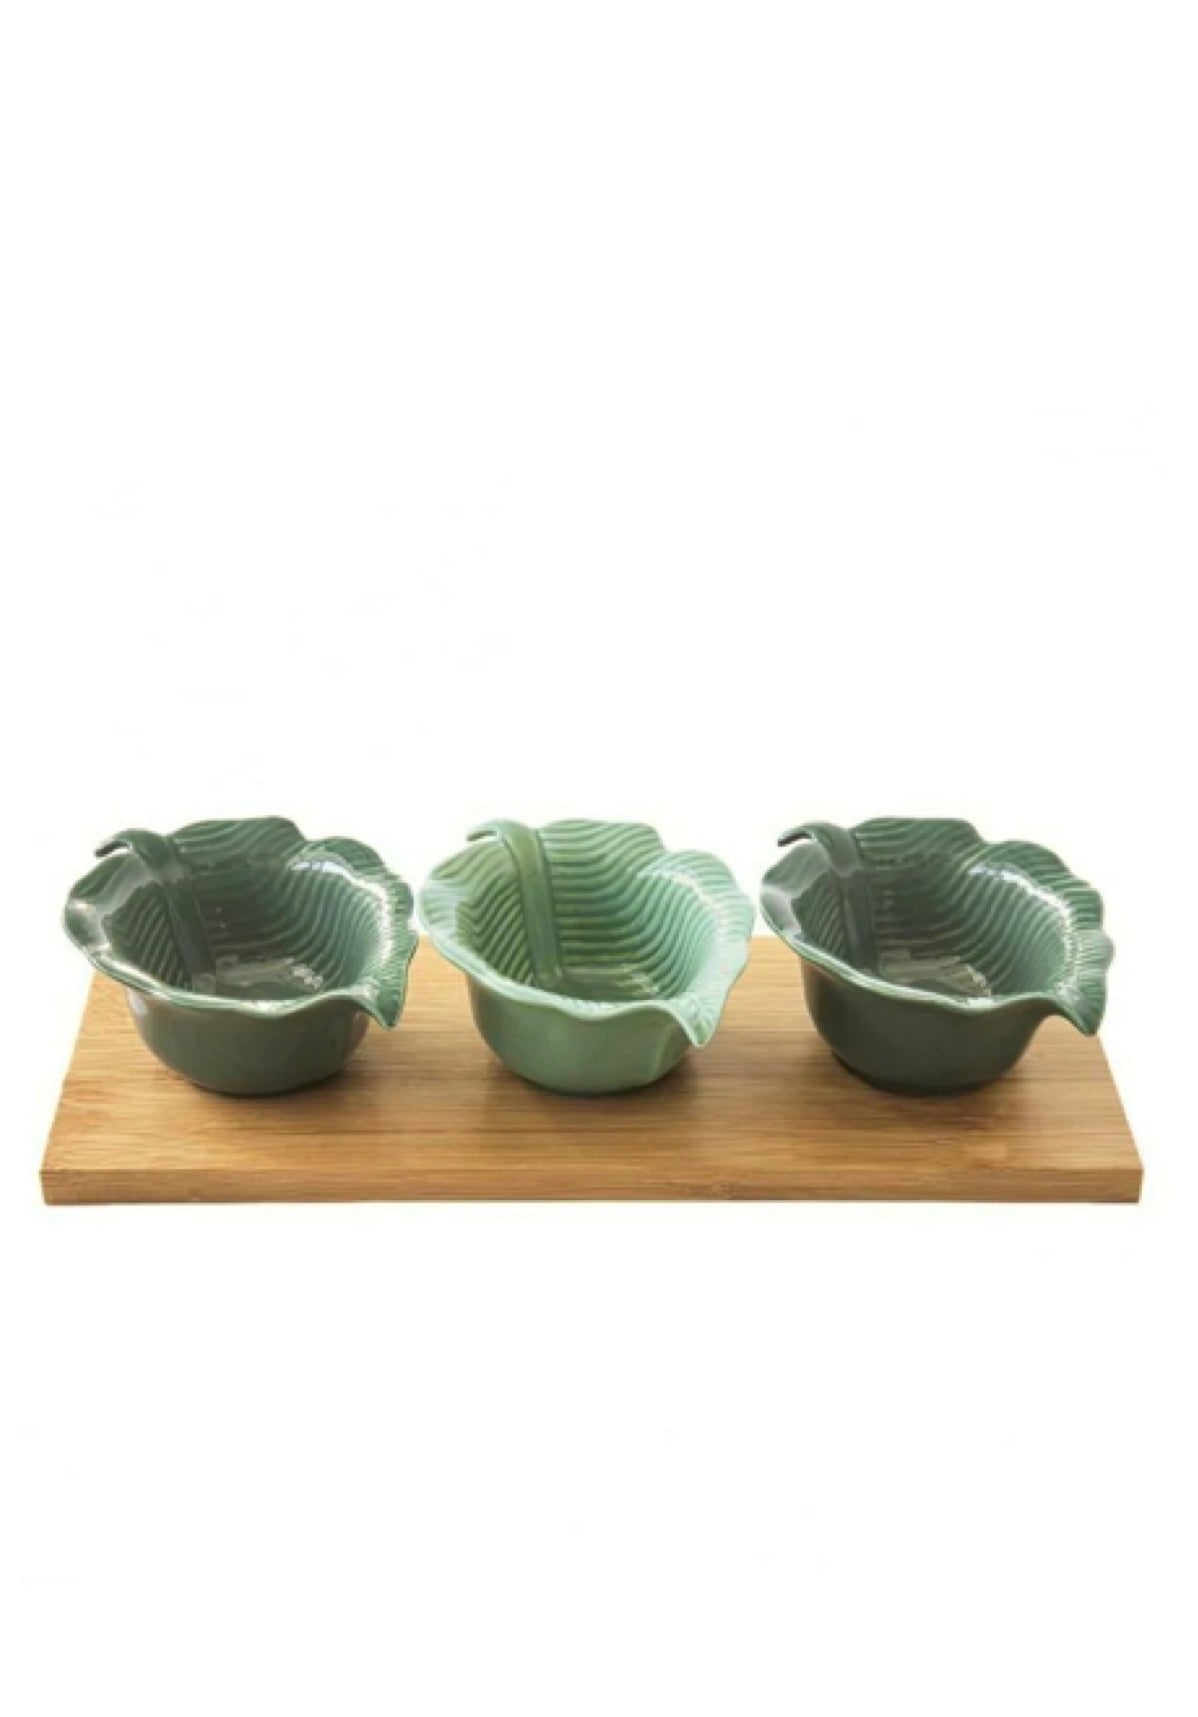 Aperitif set with bamboo tray and 3 bowls - leaf 